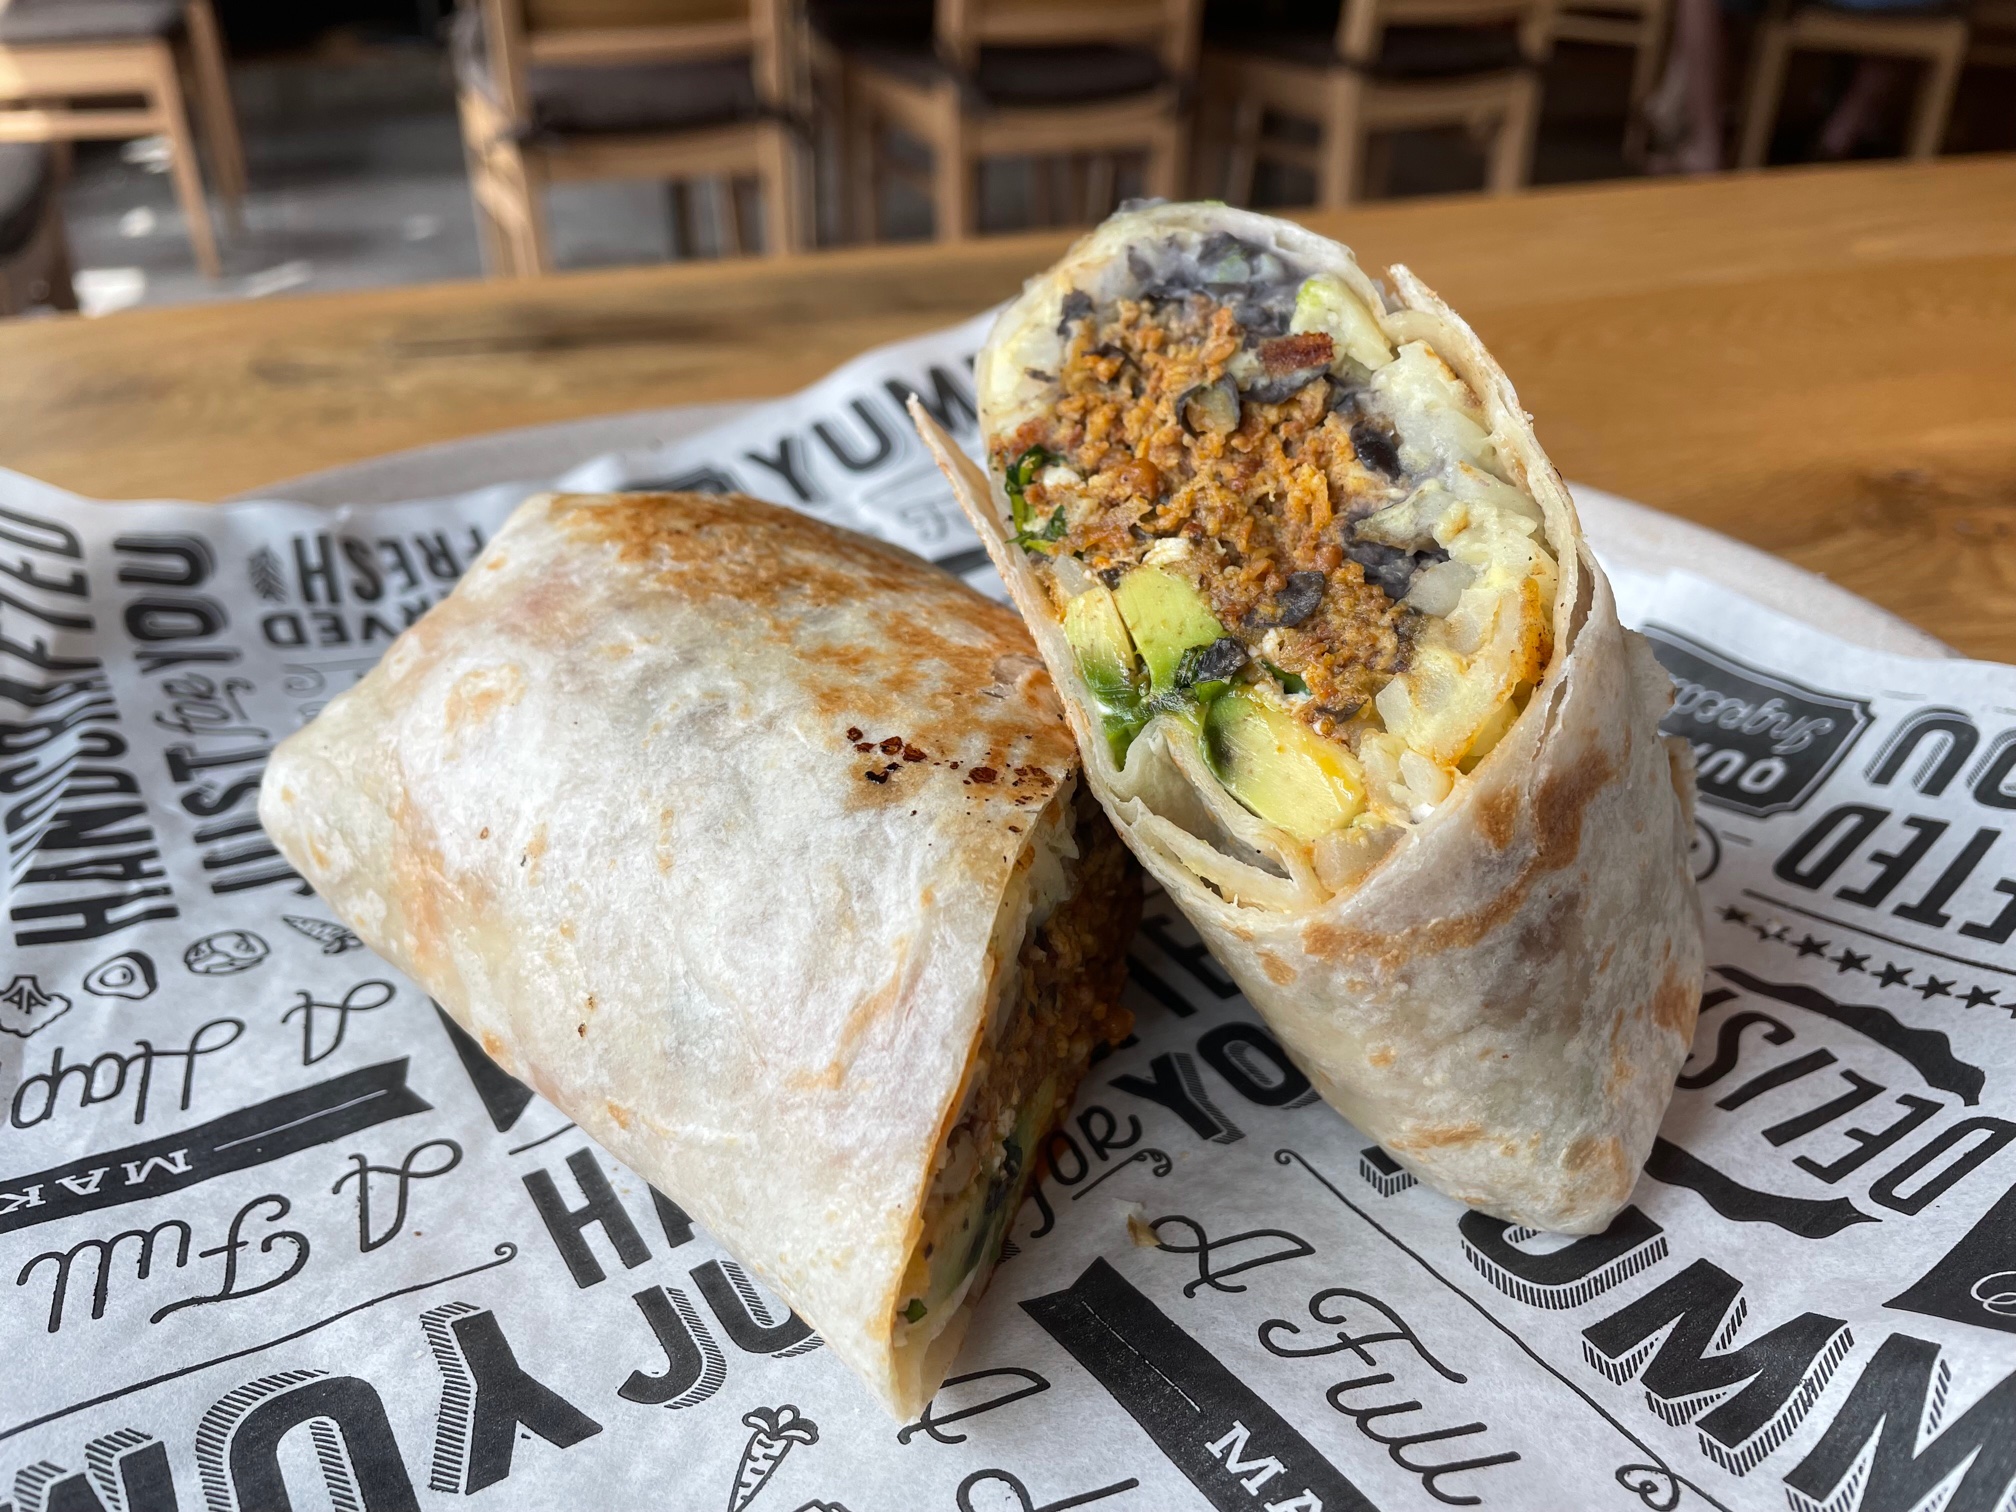 A chorizo burrito sliced in half and balanced on each other sits in a wordy parchment paper filled plate. Photo by Alyssa Buckley.